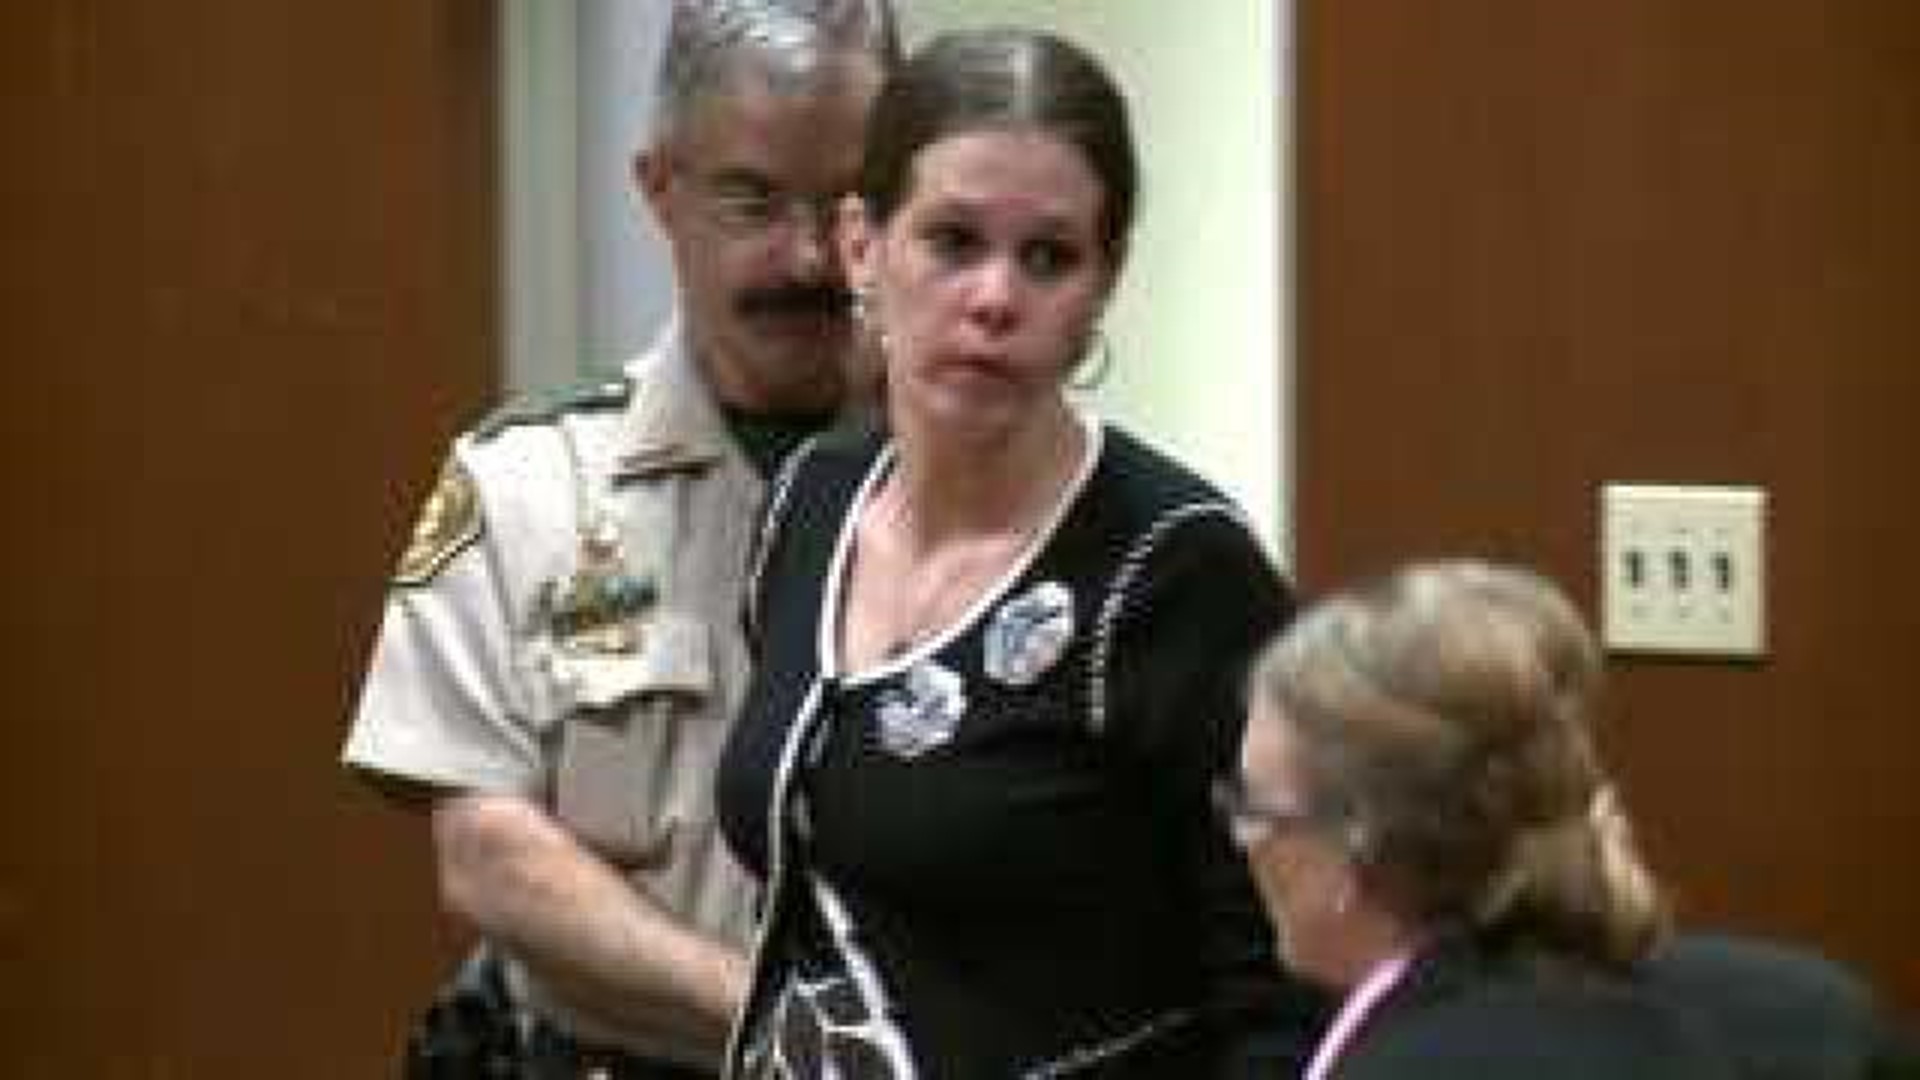 Mother gets 30 year sentence in abuse case